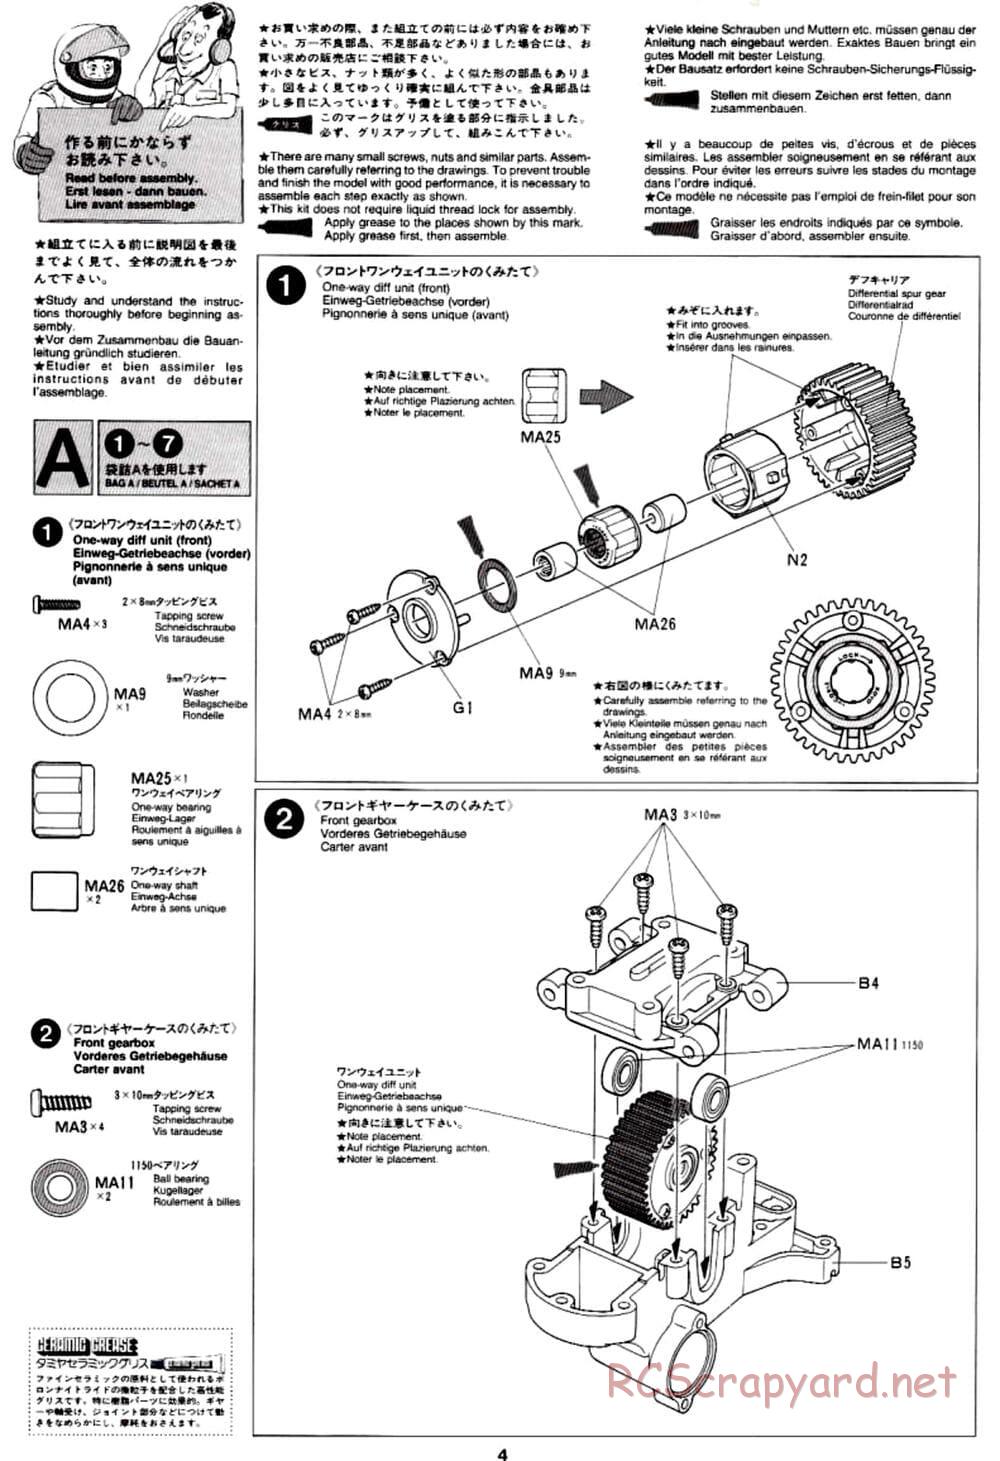 Tamiya - TA-03R TRF Special Edition Chassis - Manual - Page 4